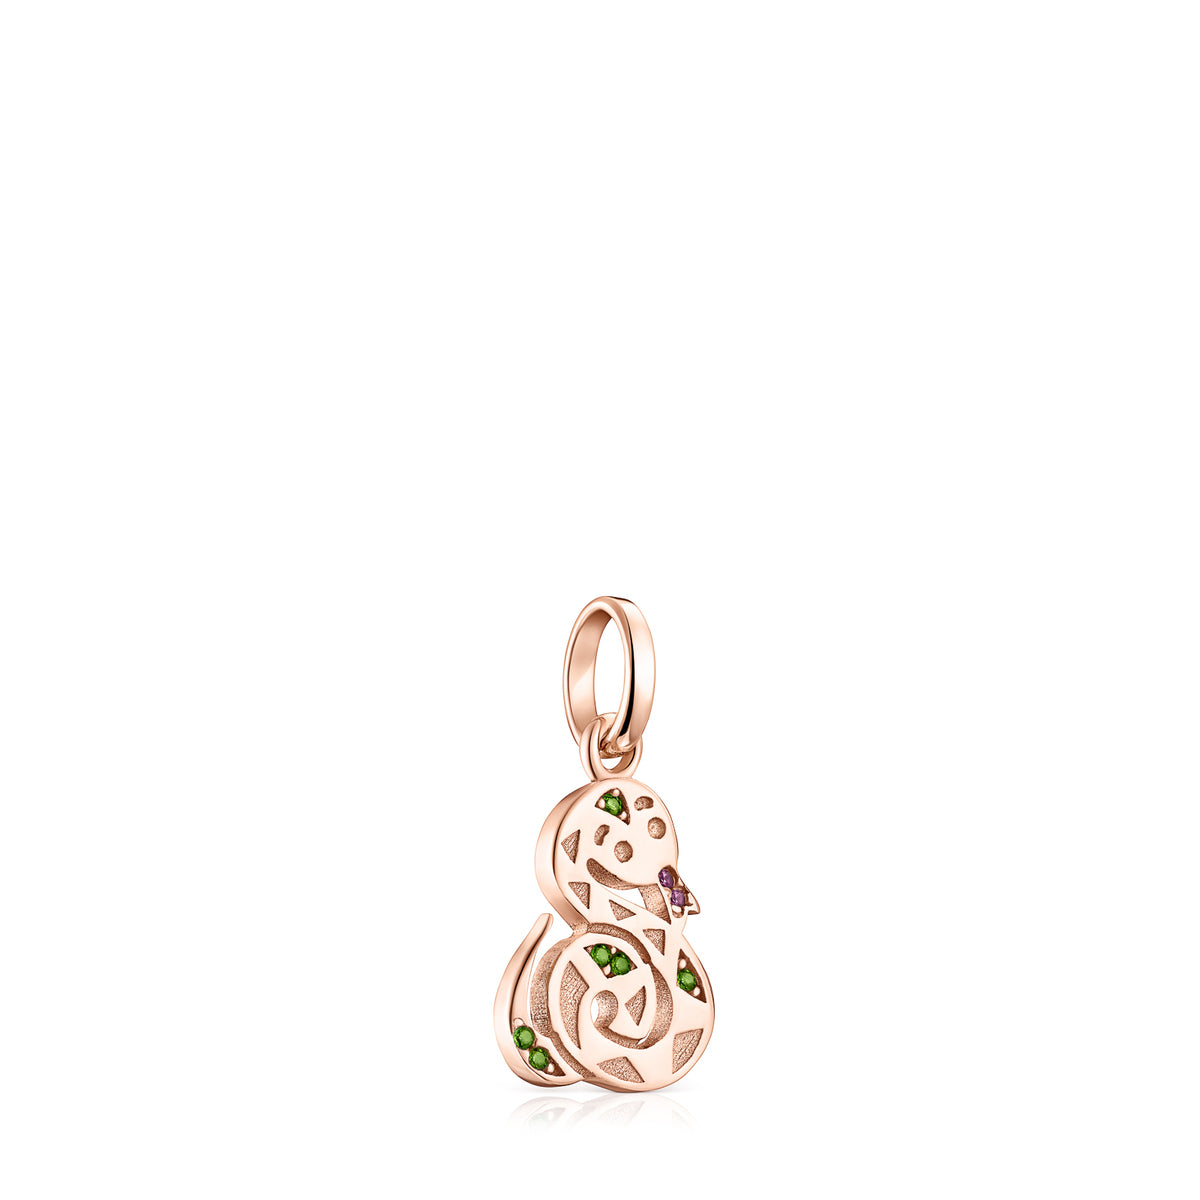 Tous Chinese Horoscope Serpent Pendant in Rose Gold Vermeil, Ruby and Chrome Diopside 918434610